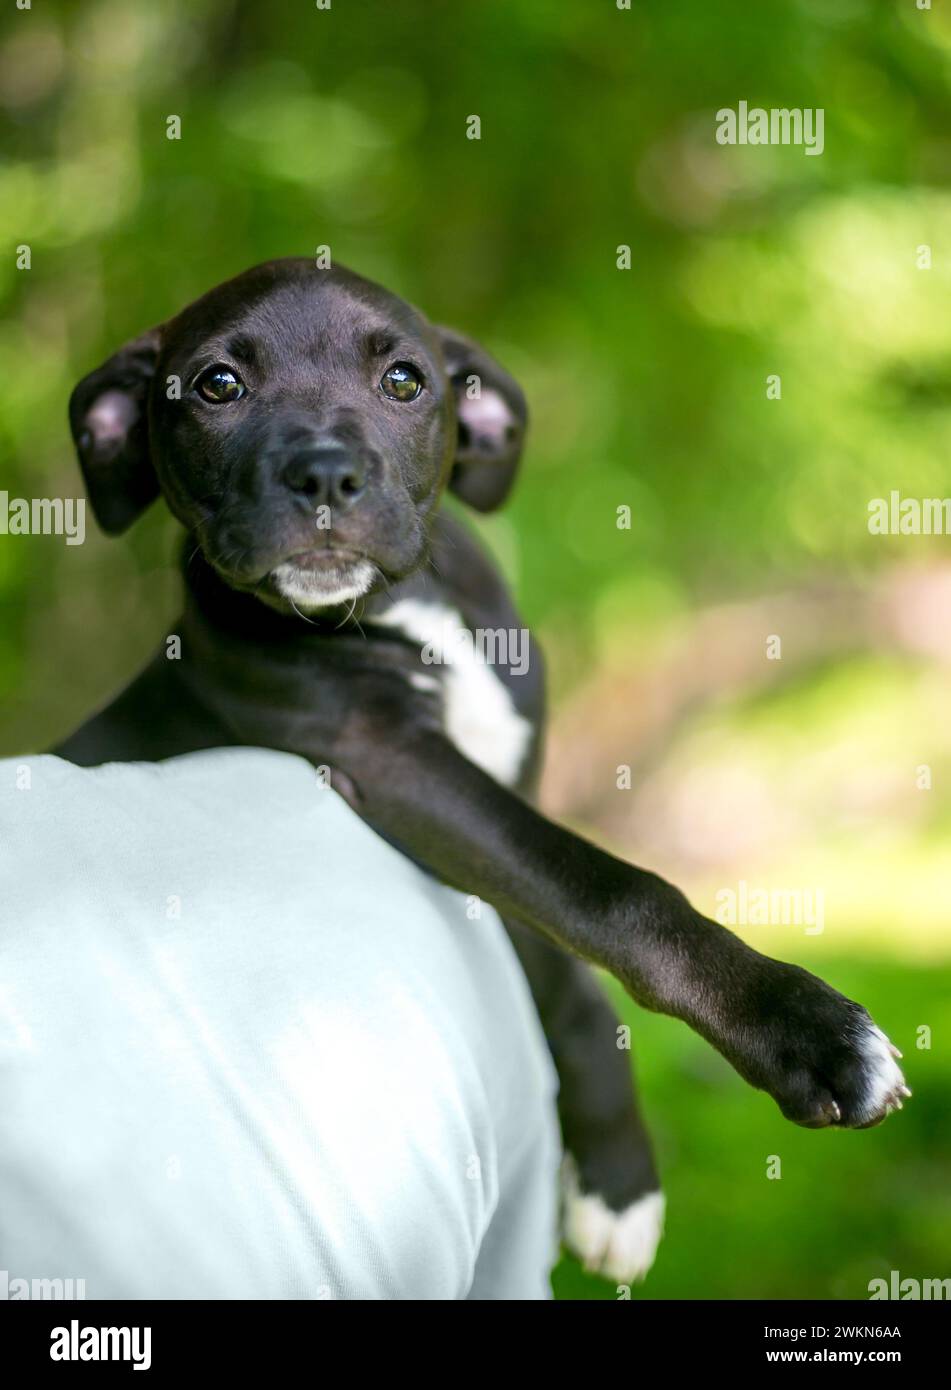 A young black and white Retriever x Terrier mixed breed puppy being held over a person's shoulder Stock Photo